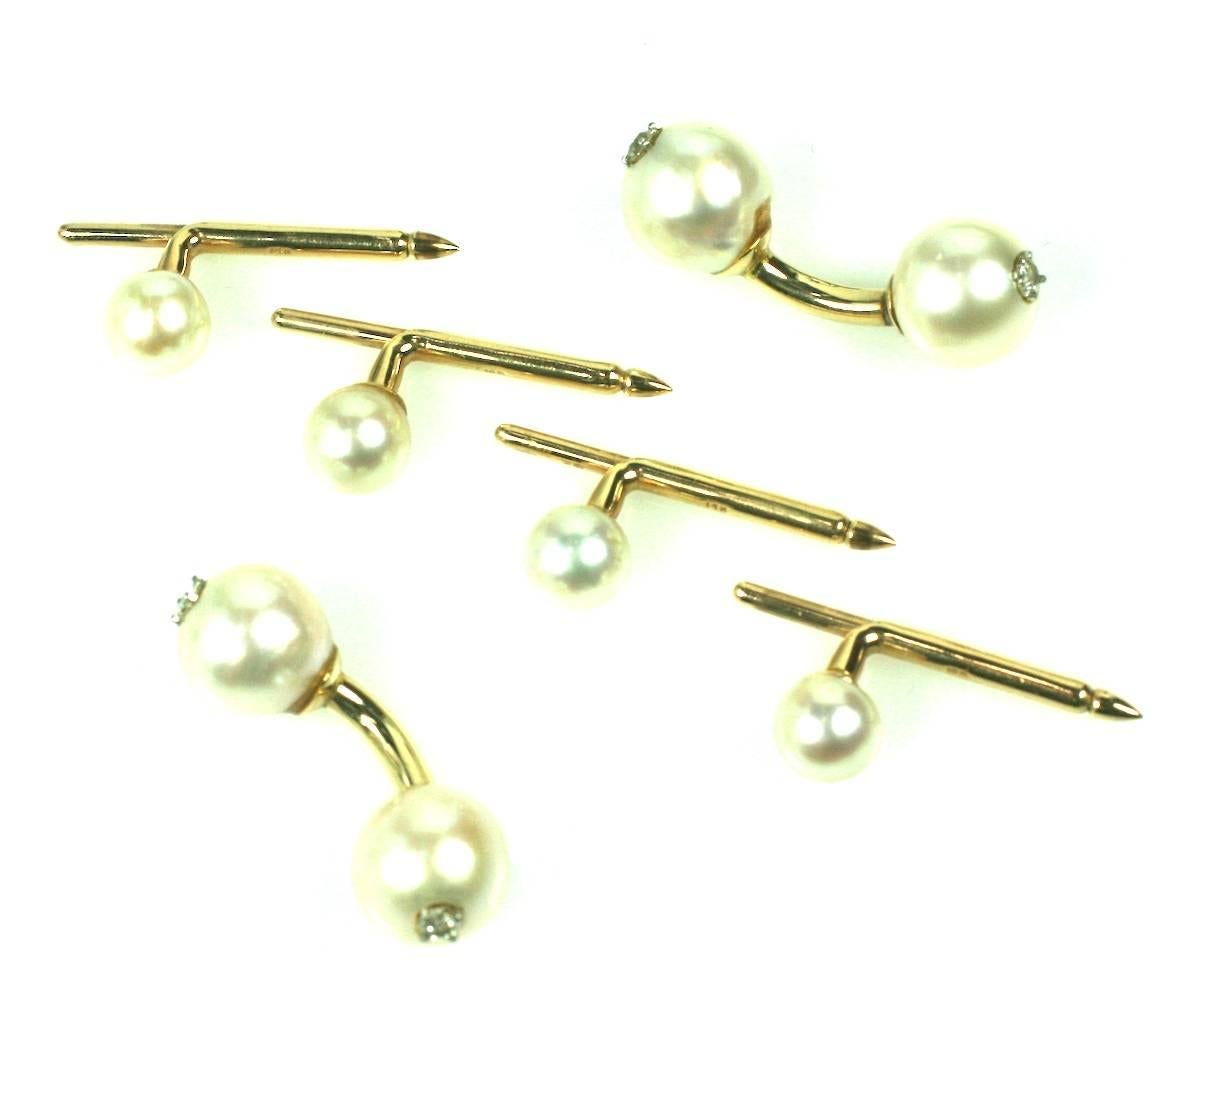 Pearl And Diamond Stud Set set in 14k gold. Barbell style pearl links with diamond centers match the 4 pearl shirt studs. Elegant and timeless mens formal wear. USA 1950's. Excellent condition. 